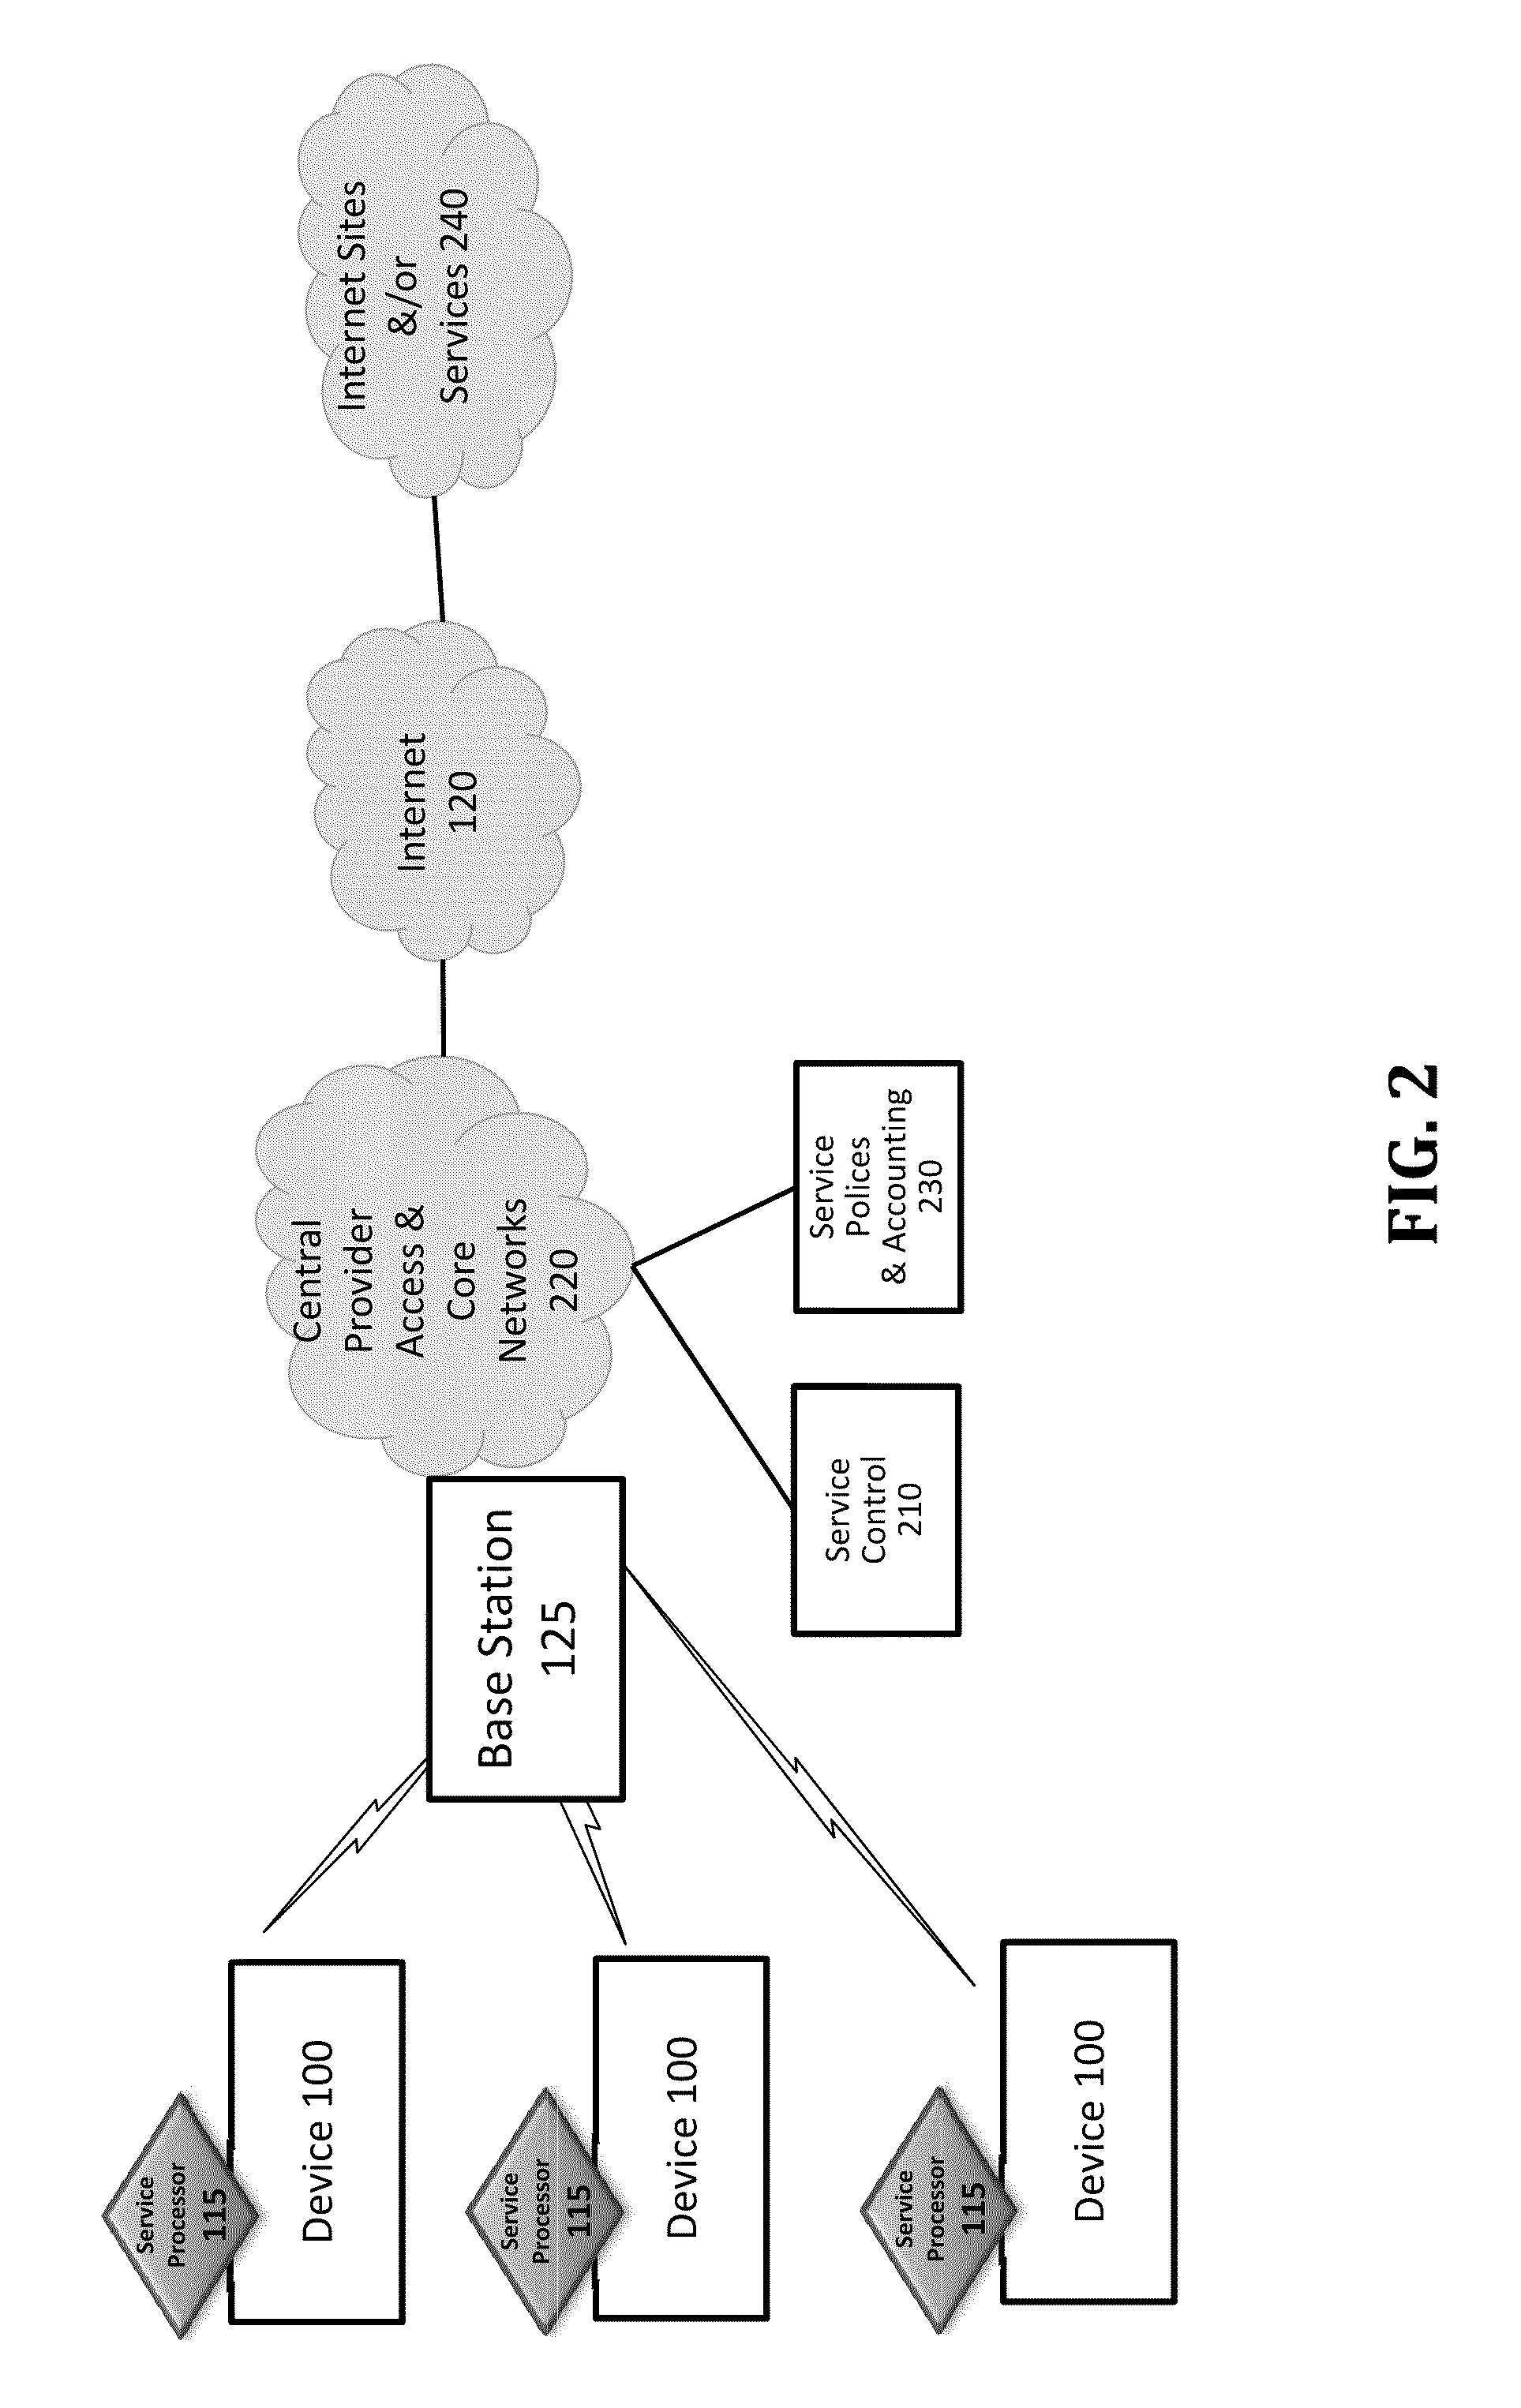 Quality of service for device assisted services